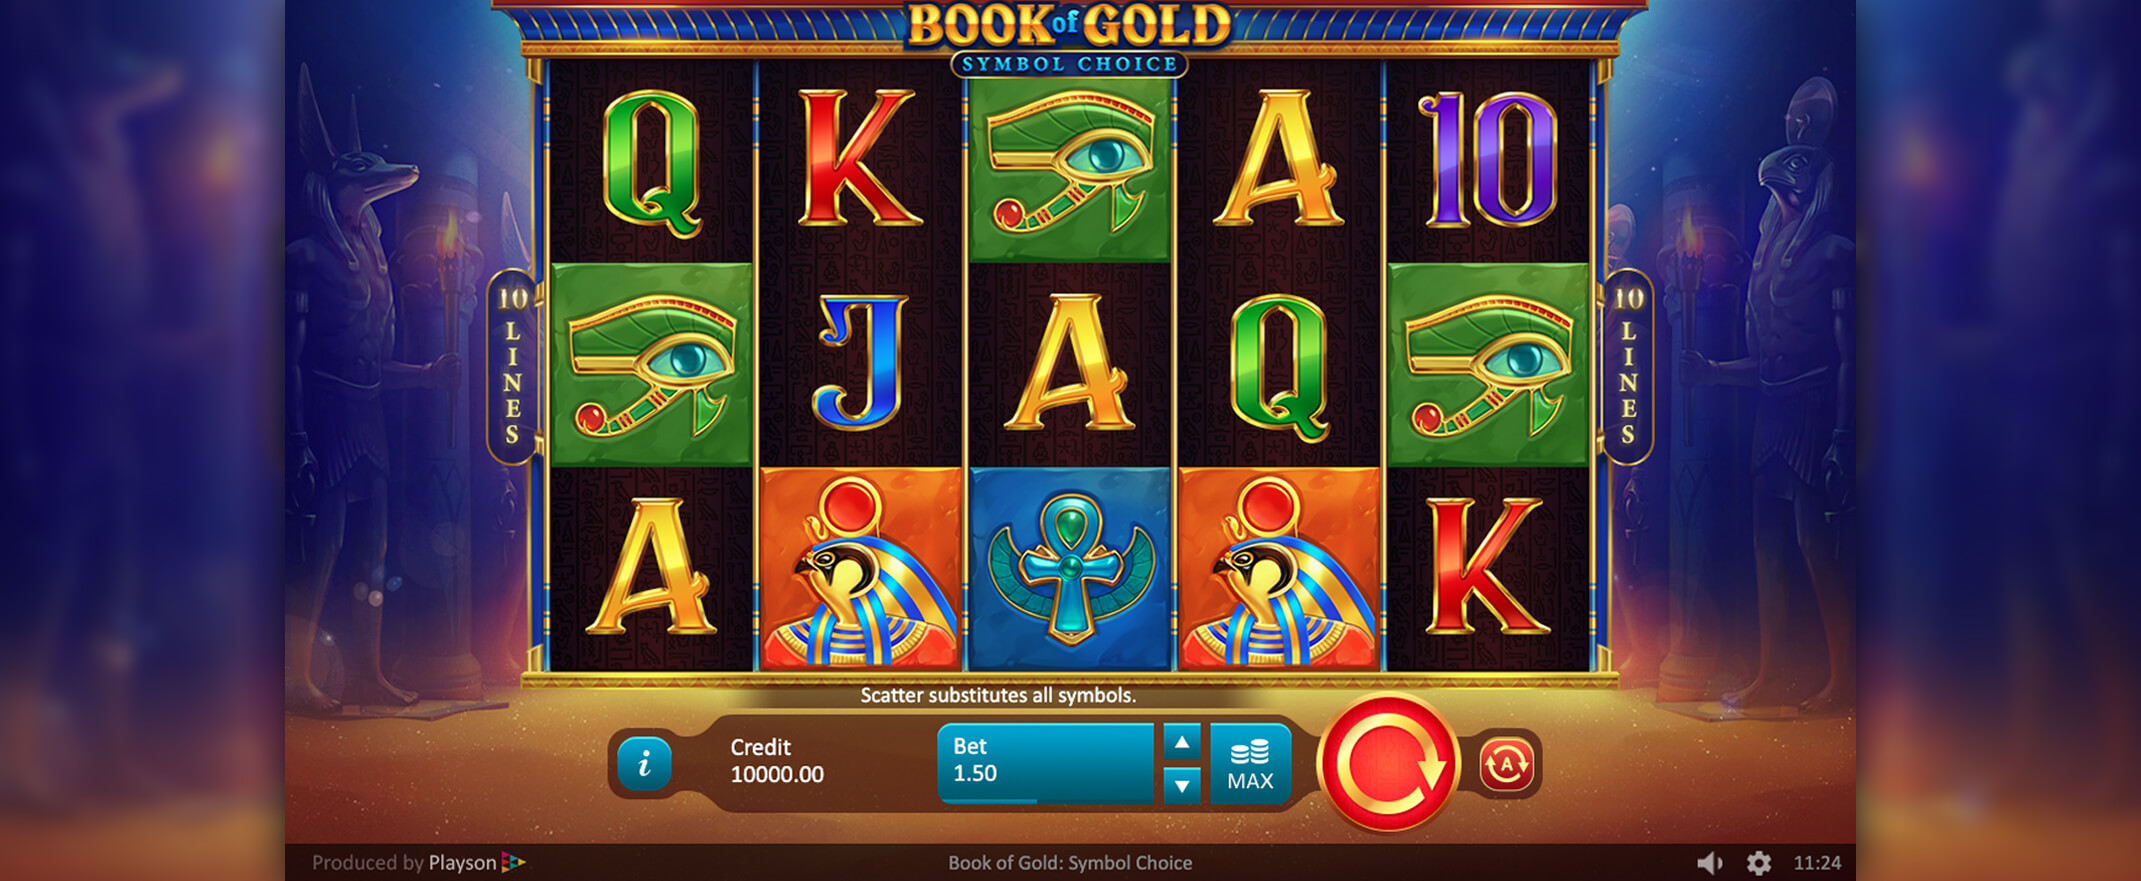 Book of Gold: Symbol Choice slot by Playson